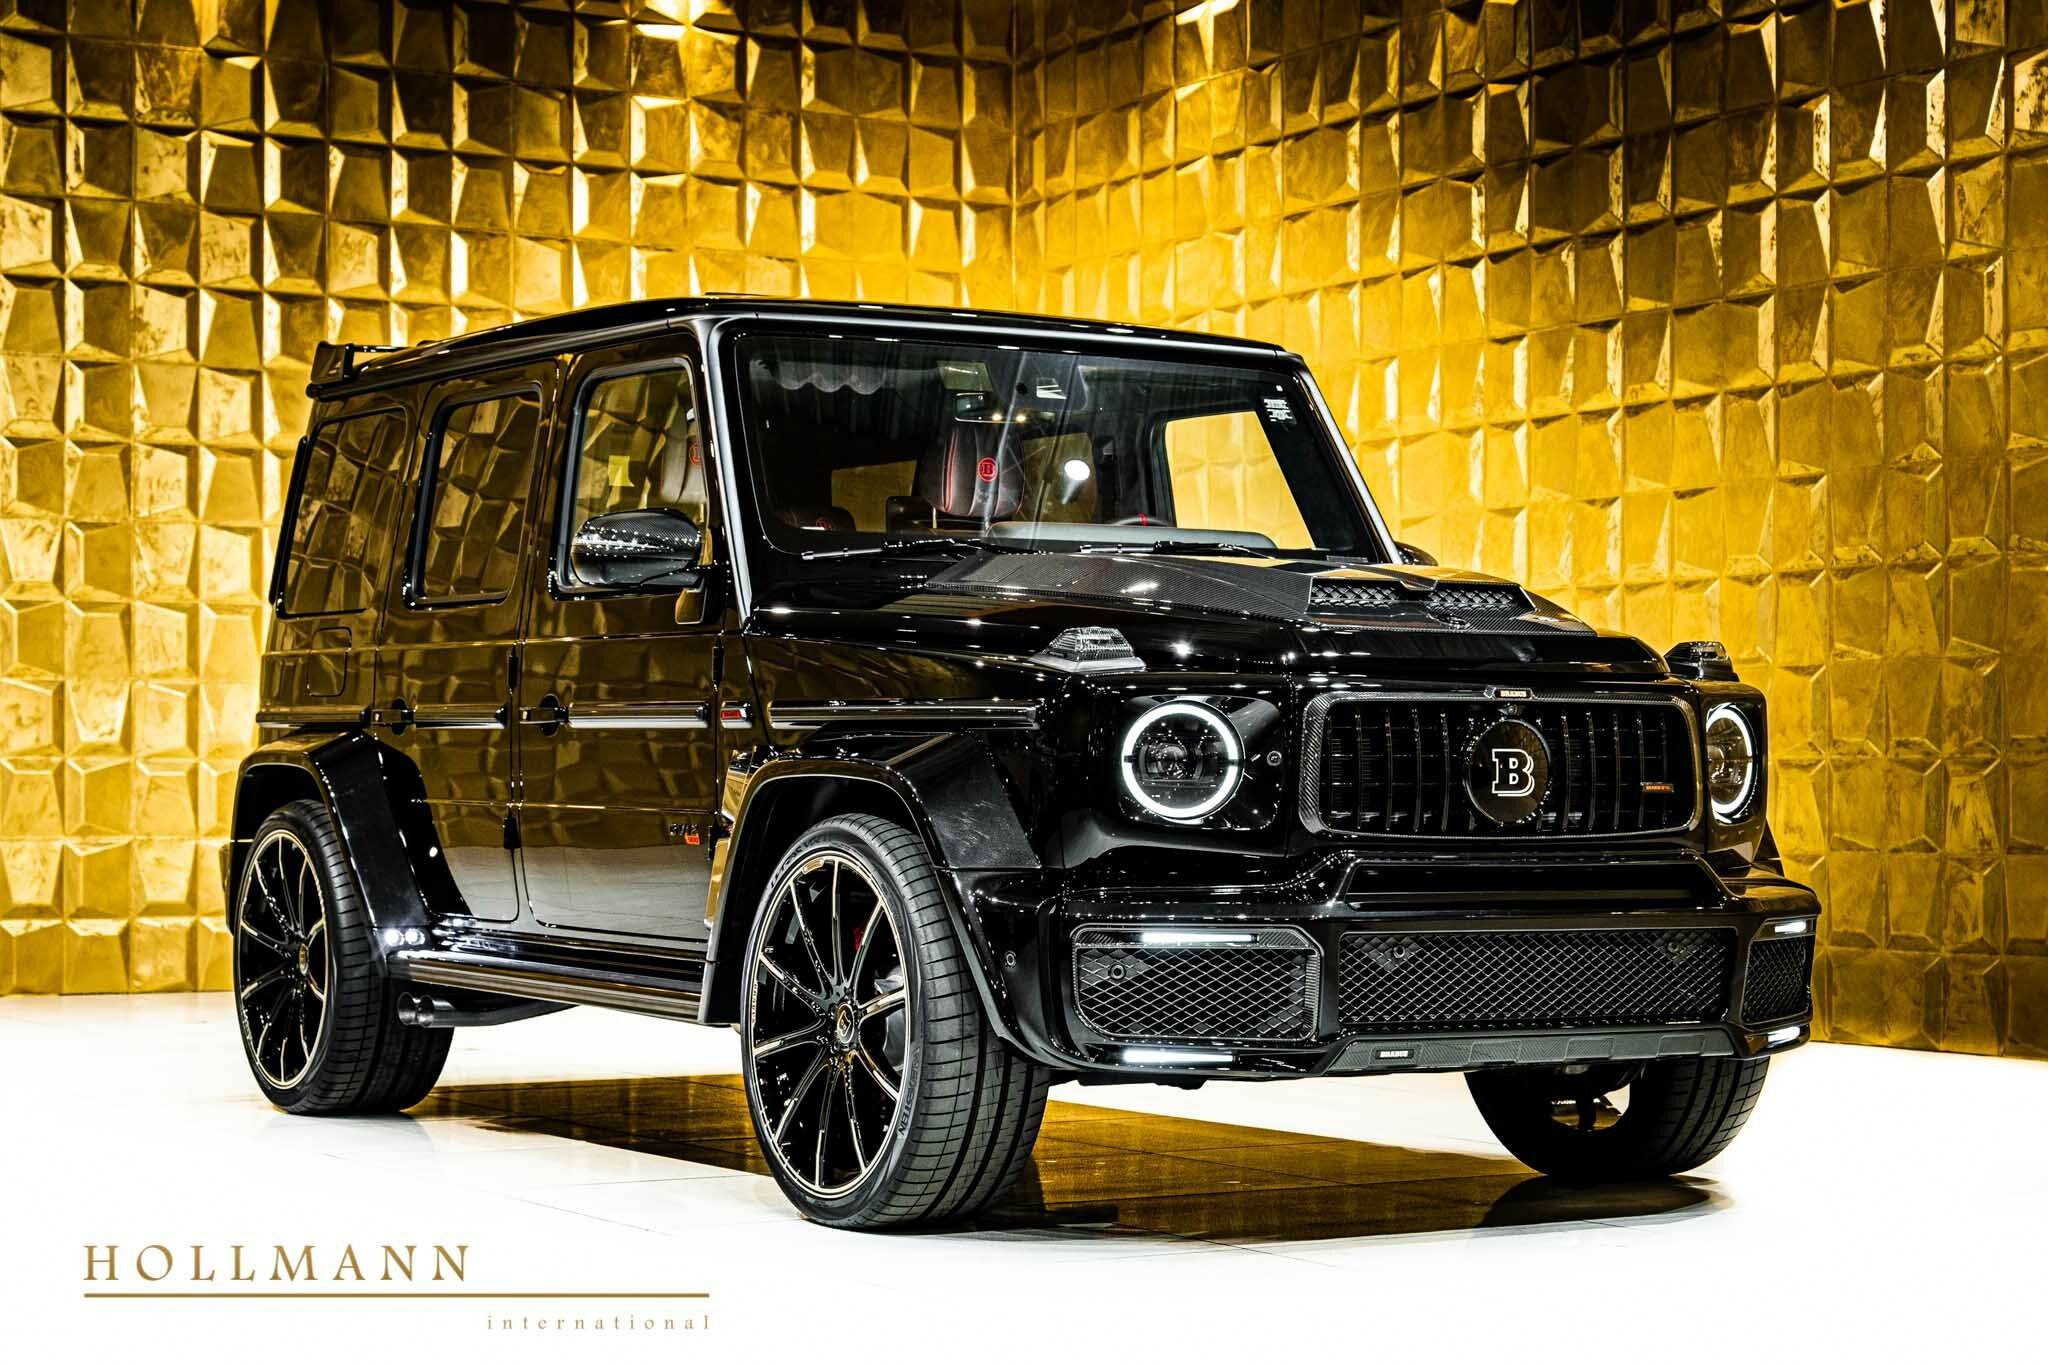 https://s1.cdn.autoevolution.com/images/news/this-brabus-tuned-mercedes-g-class-could-be-yours-if-you-sell-your-home-and-some-organs-187541_1.jpg